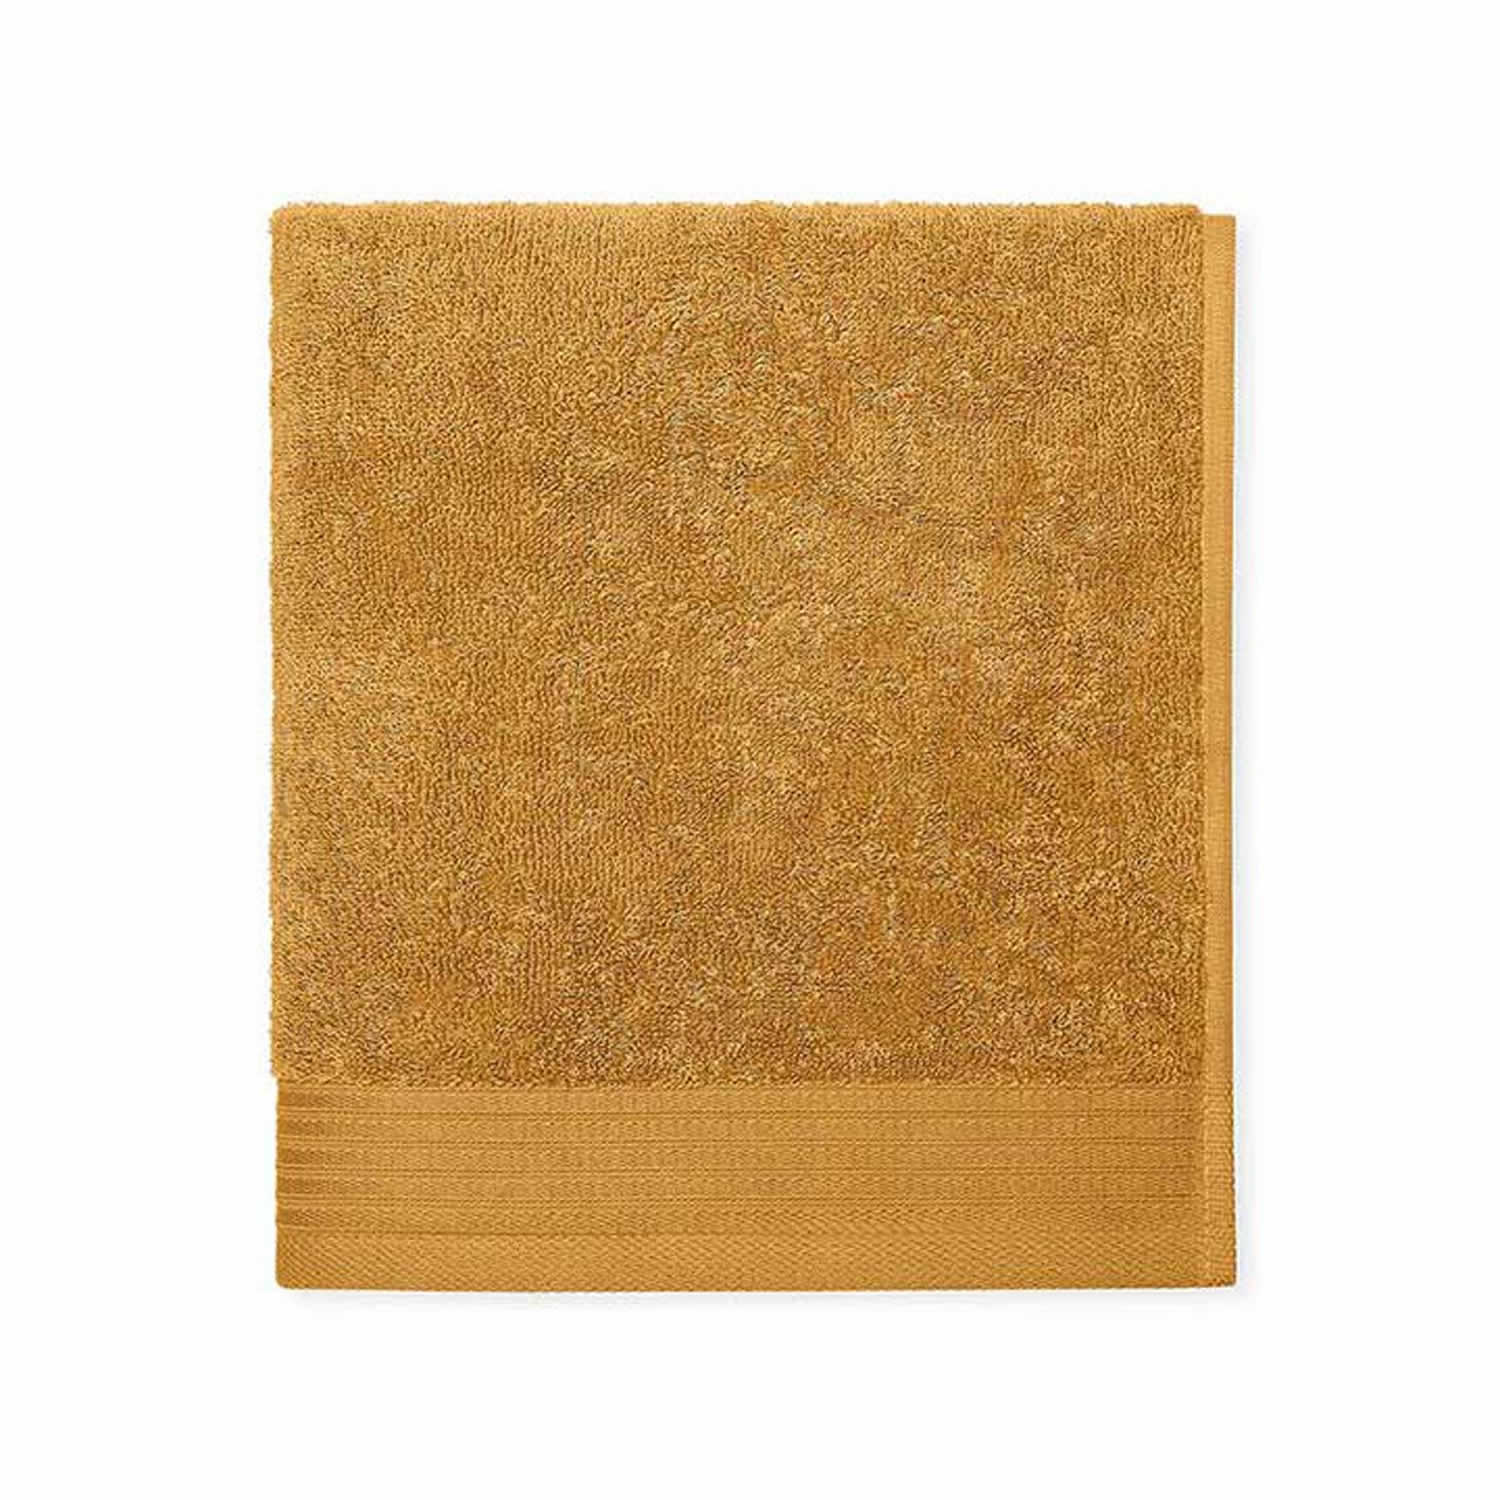 Schlossberg COSHMERE towel - Curry